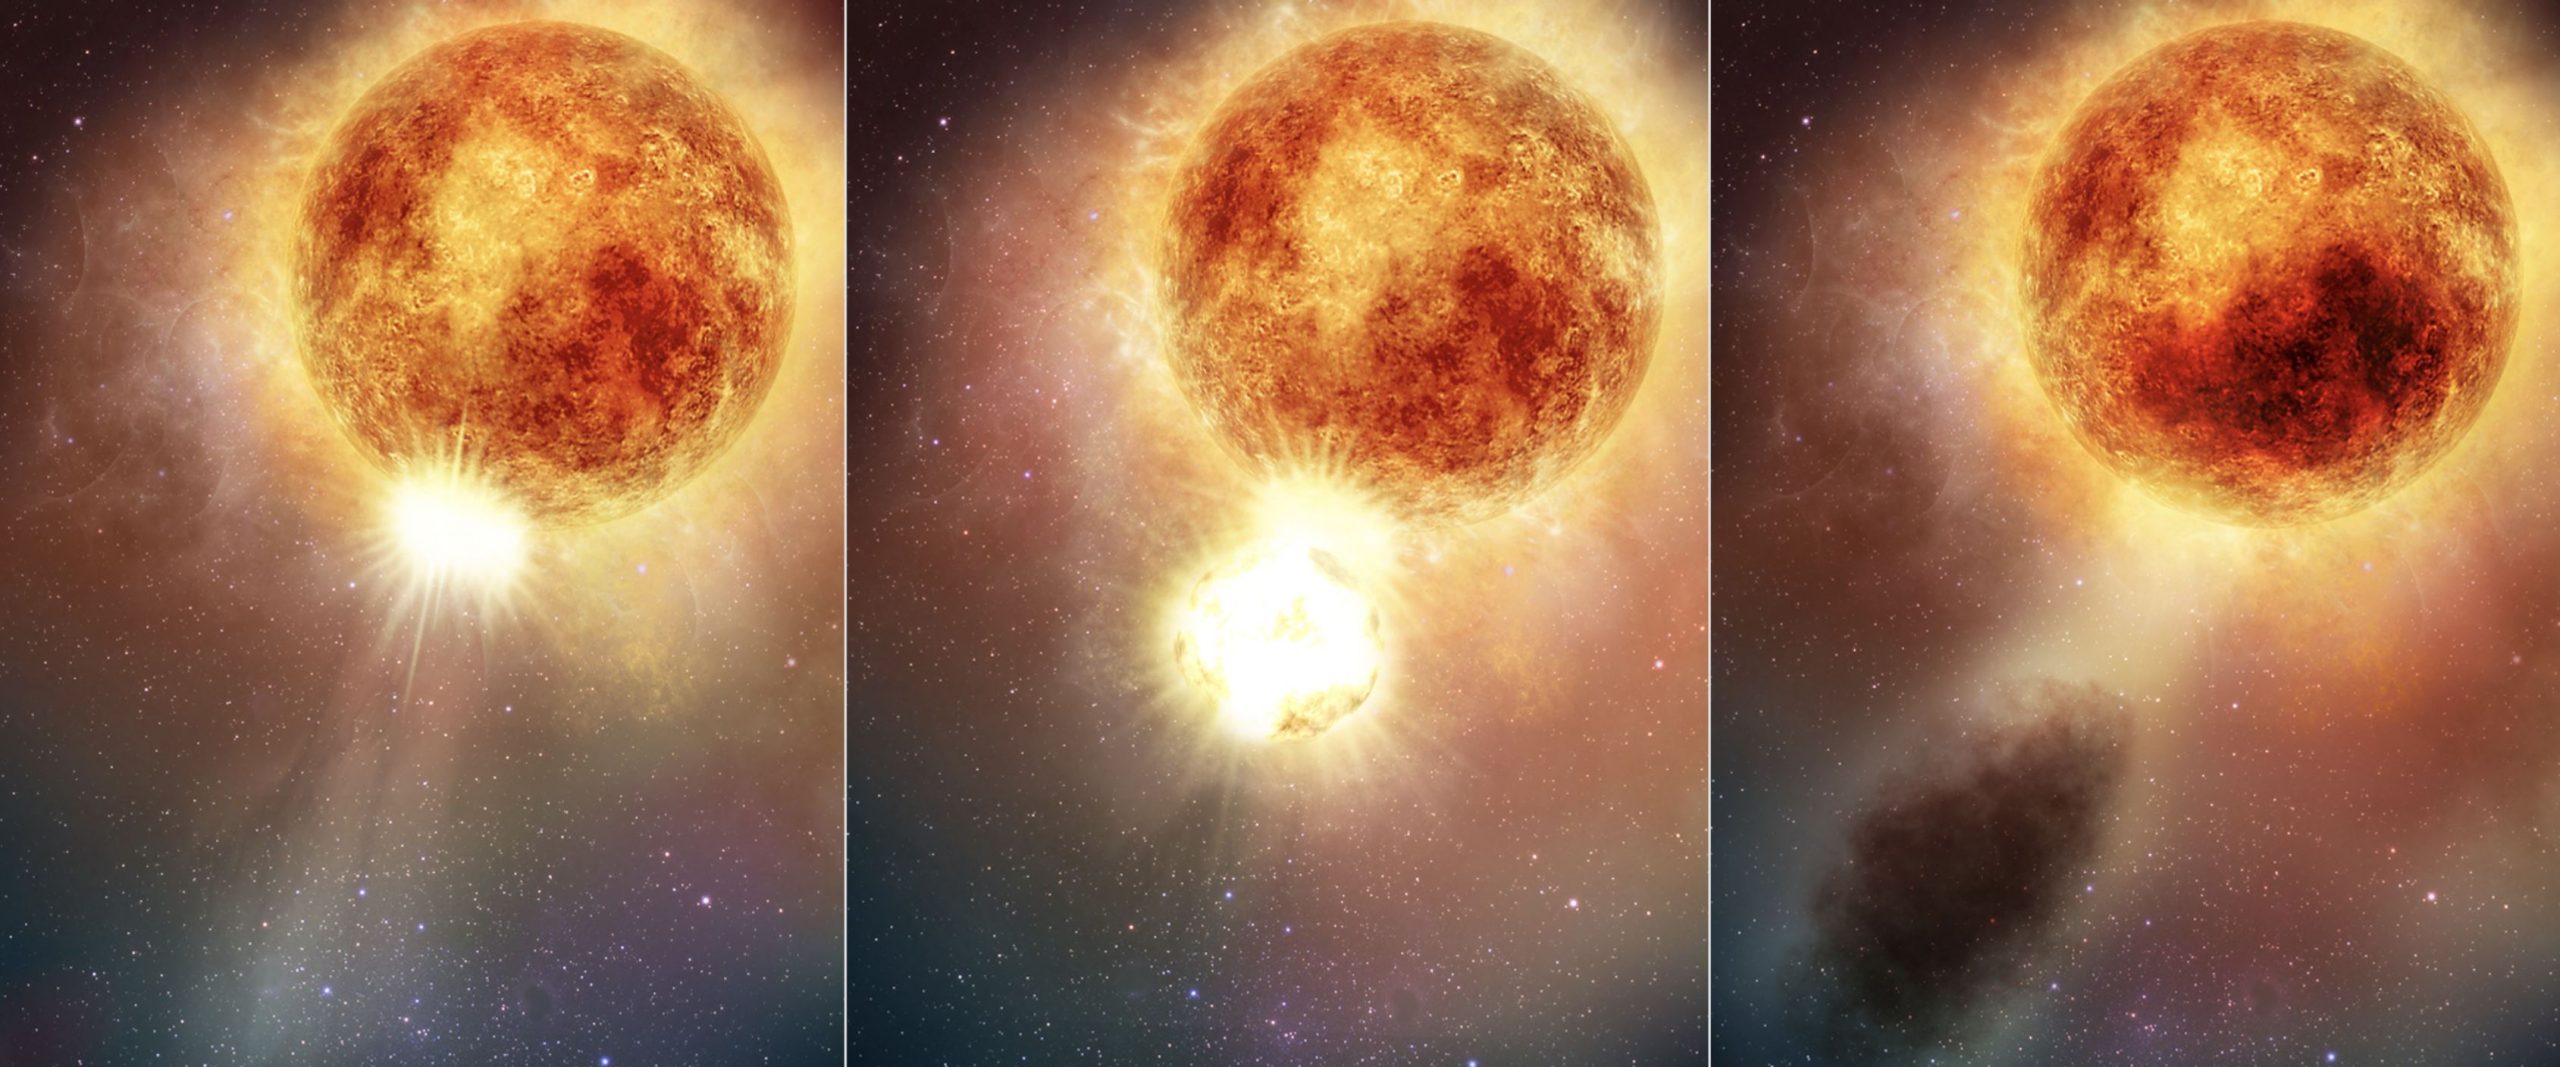 An illustration showing how Betelgeuse blew its top off. Credits: NASA, ESA, Elizabeth Wheatley (STScI).